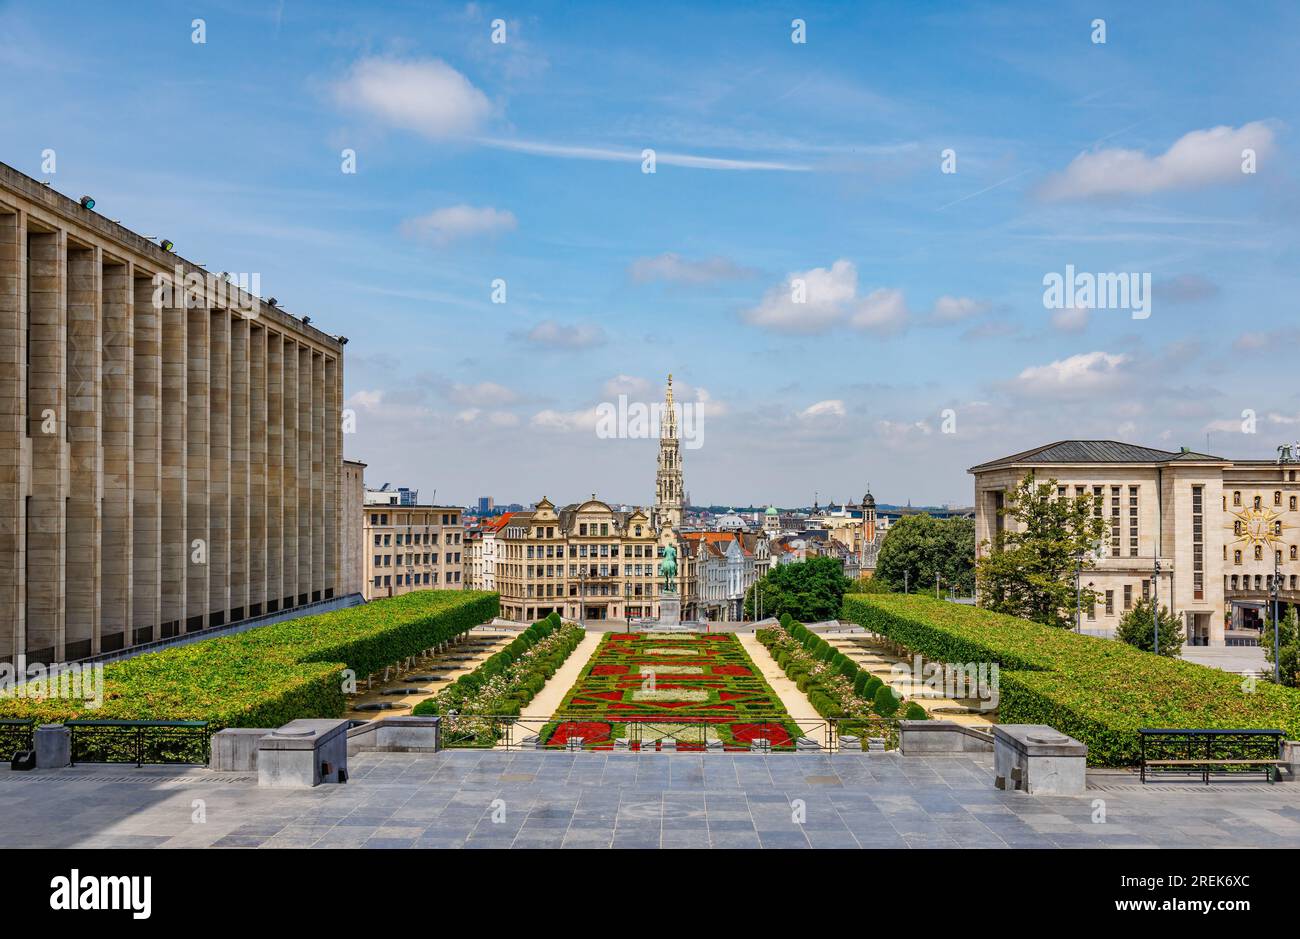 The Mont des Arts, meaning Hill or Mount of the Arts, is an urban complex and historic site in central Brussels, Belgium, includes a beautiful public Stock Photo